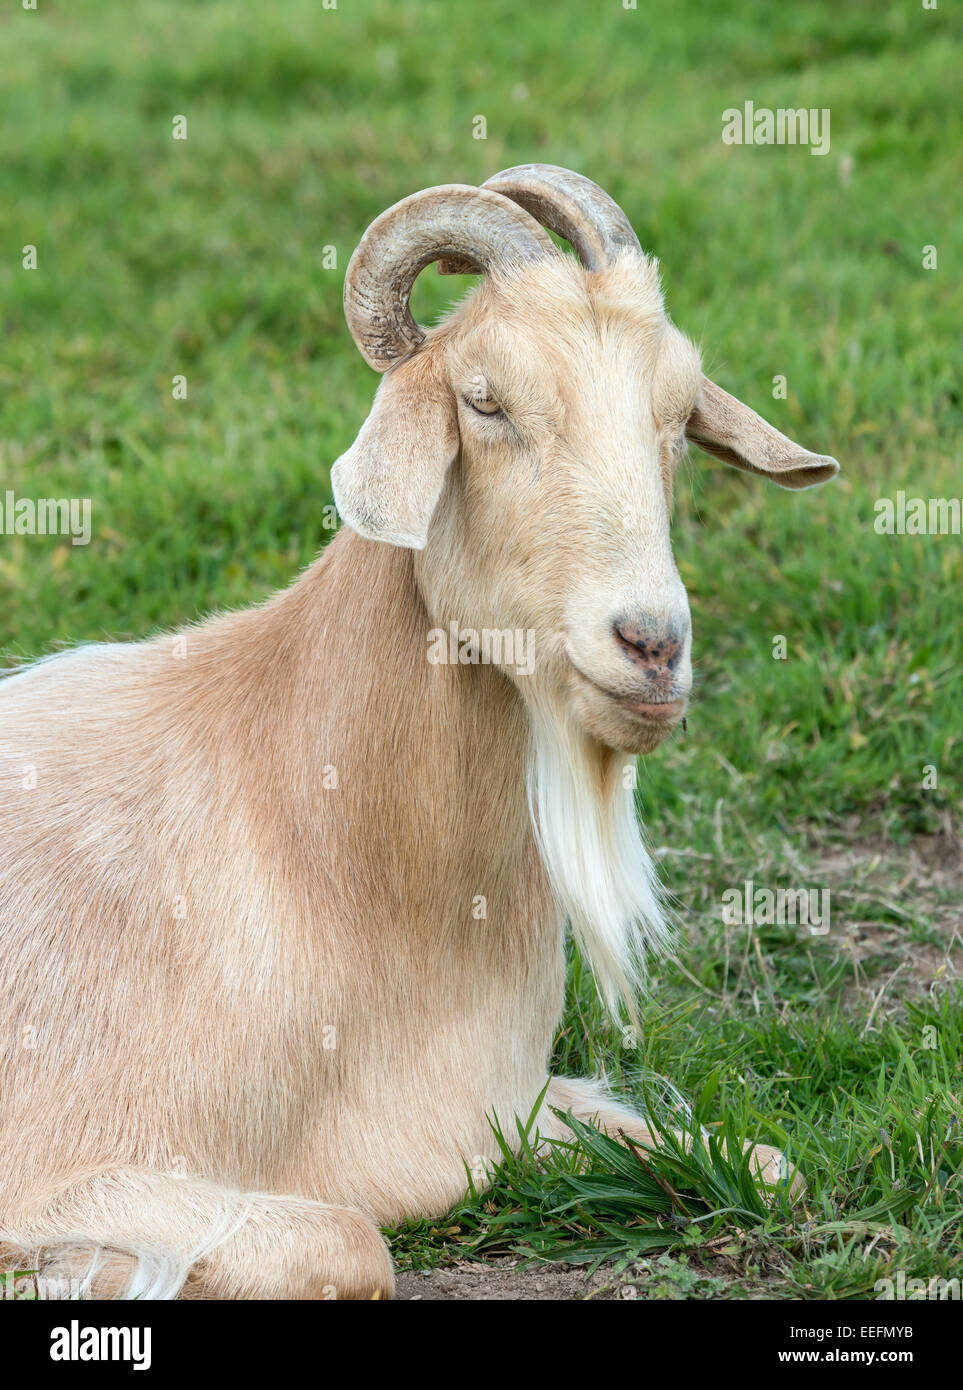 Close up of a Domesticated Goat Stock Photo